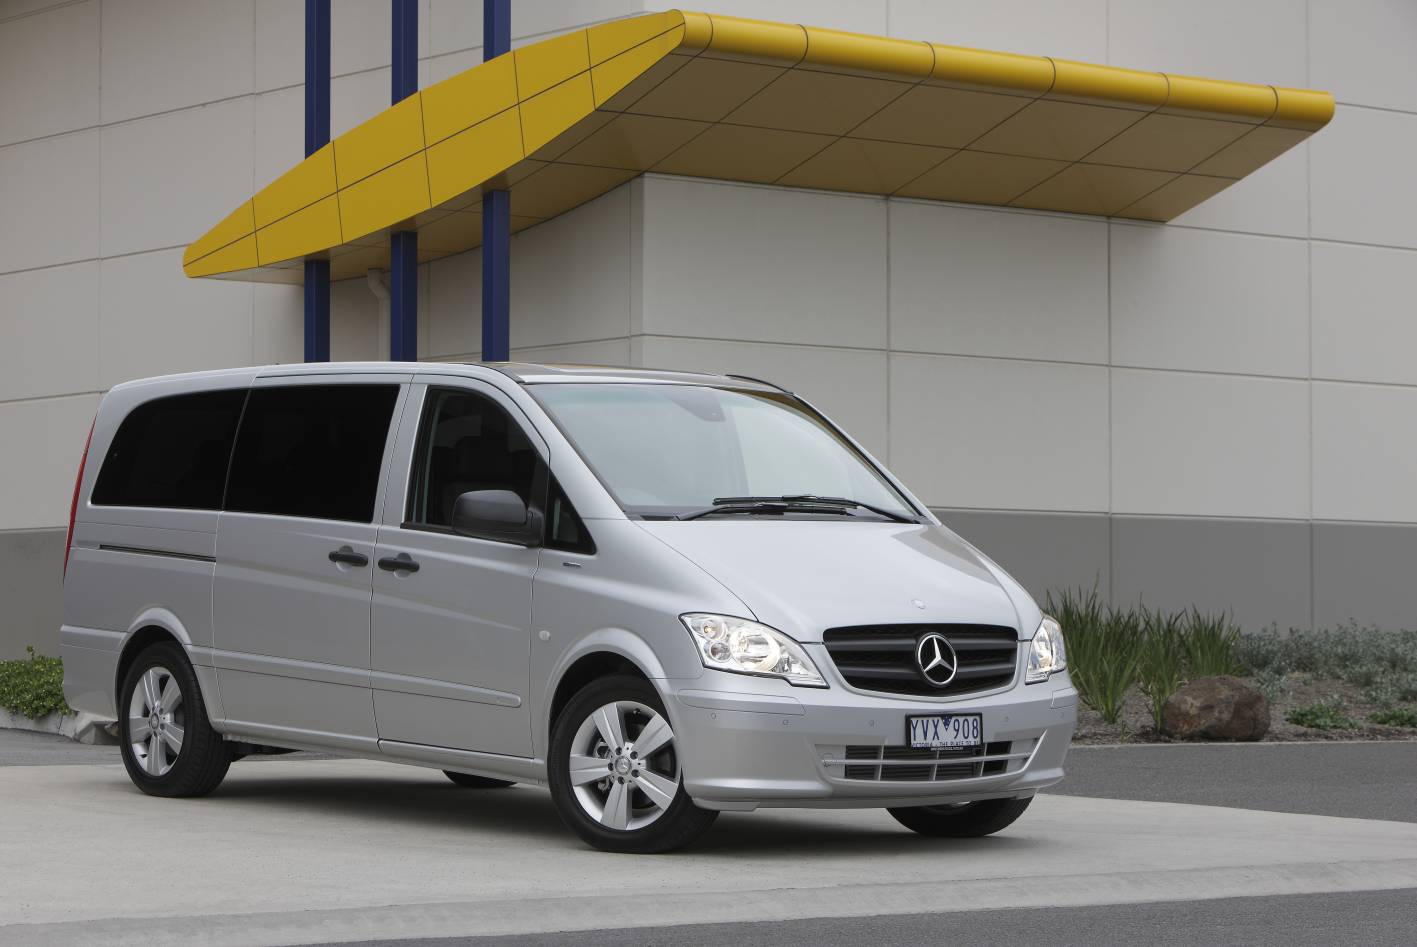 Mercedes benz vito people mover #7